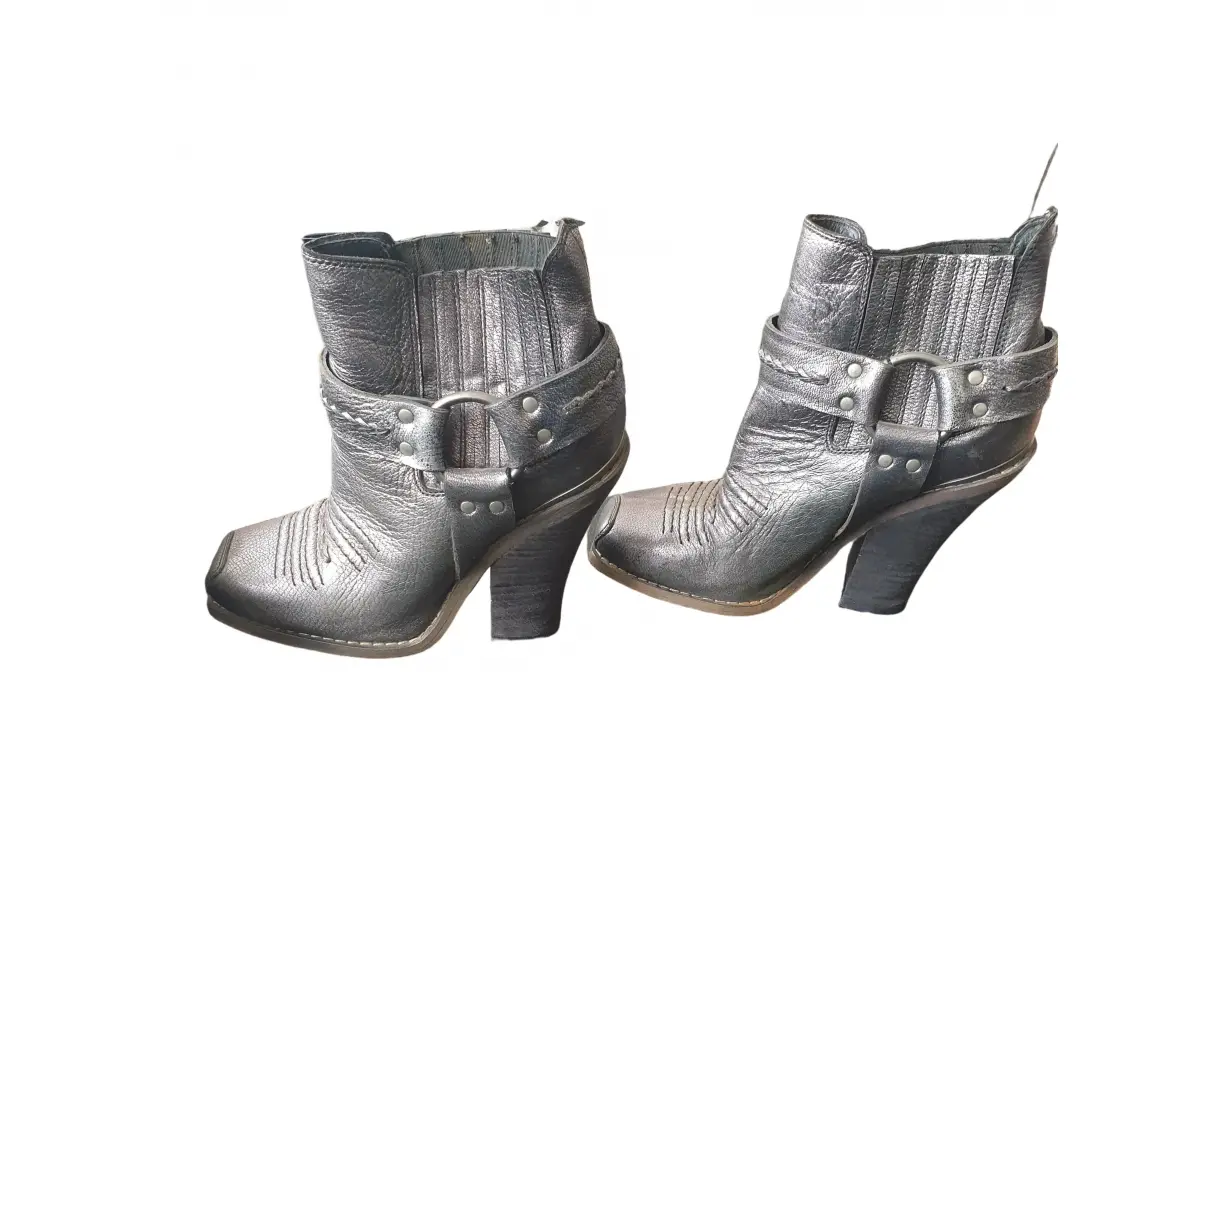 Leather buckled boots Barbara Bui - Vintage